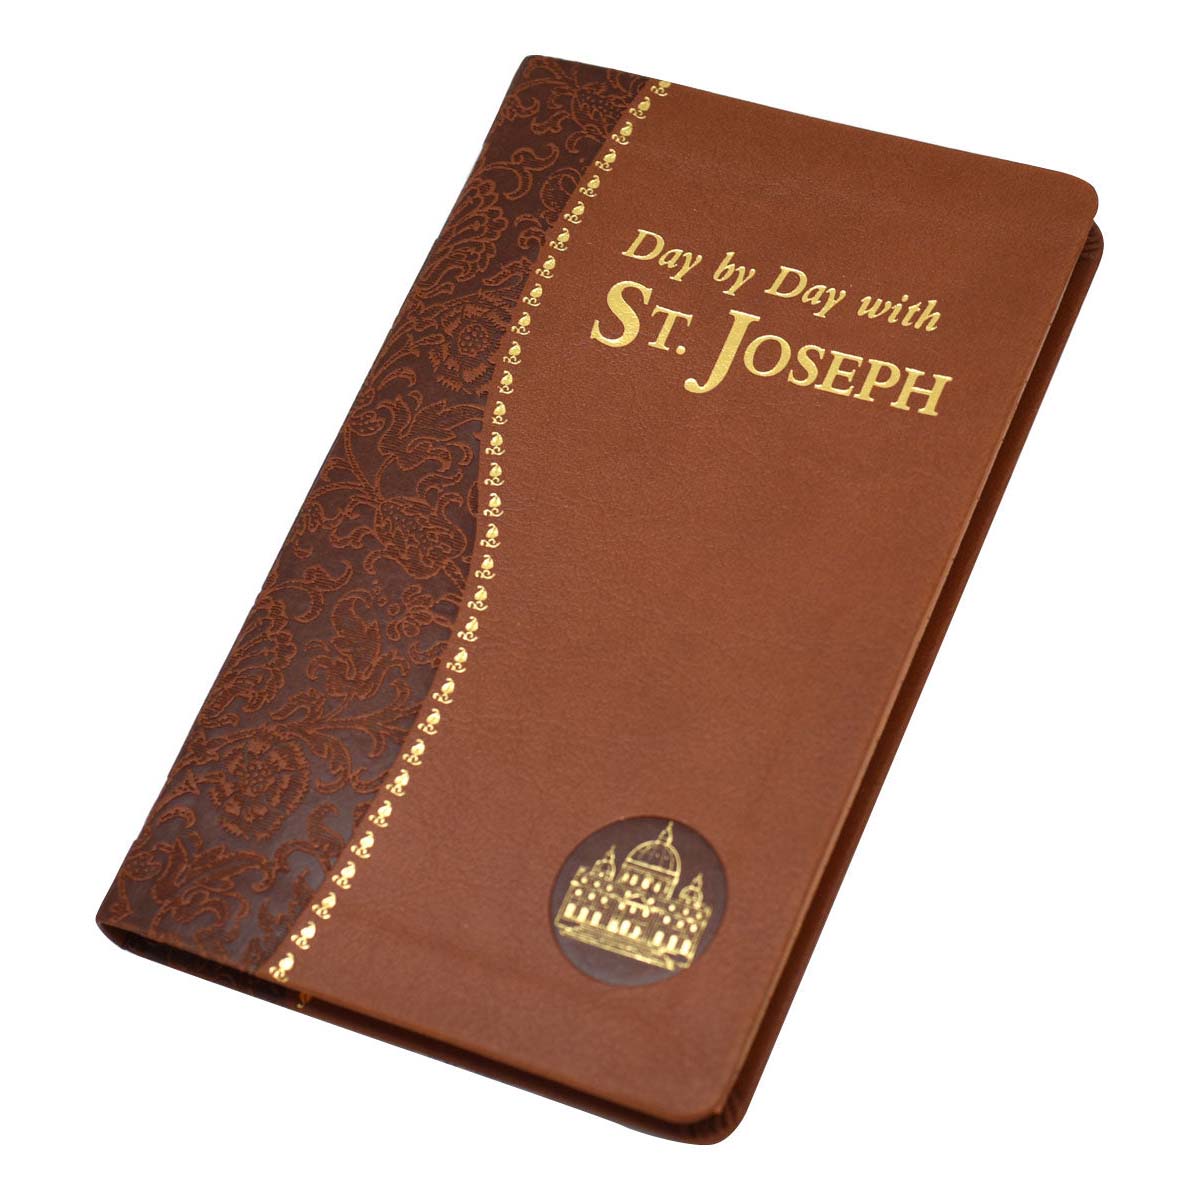 Day By Day with St. Joseph - Custom Council